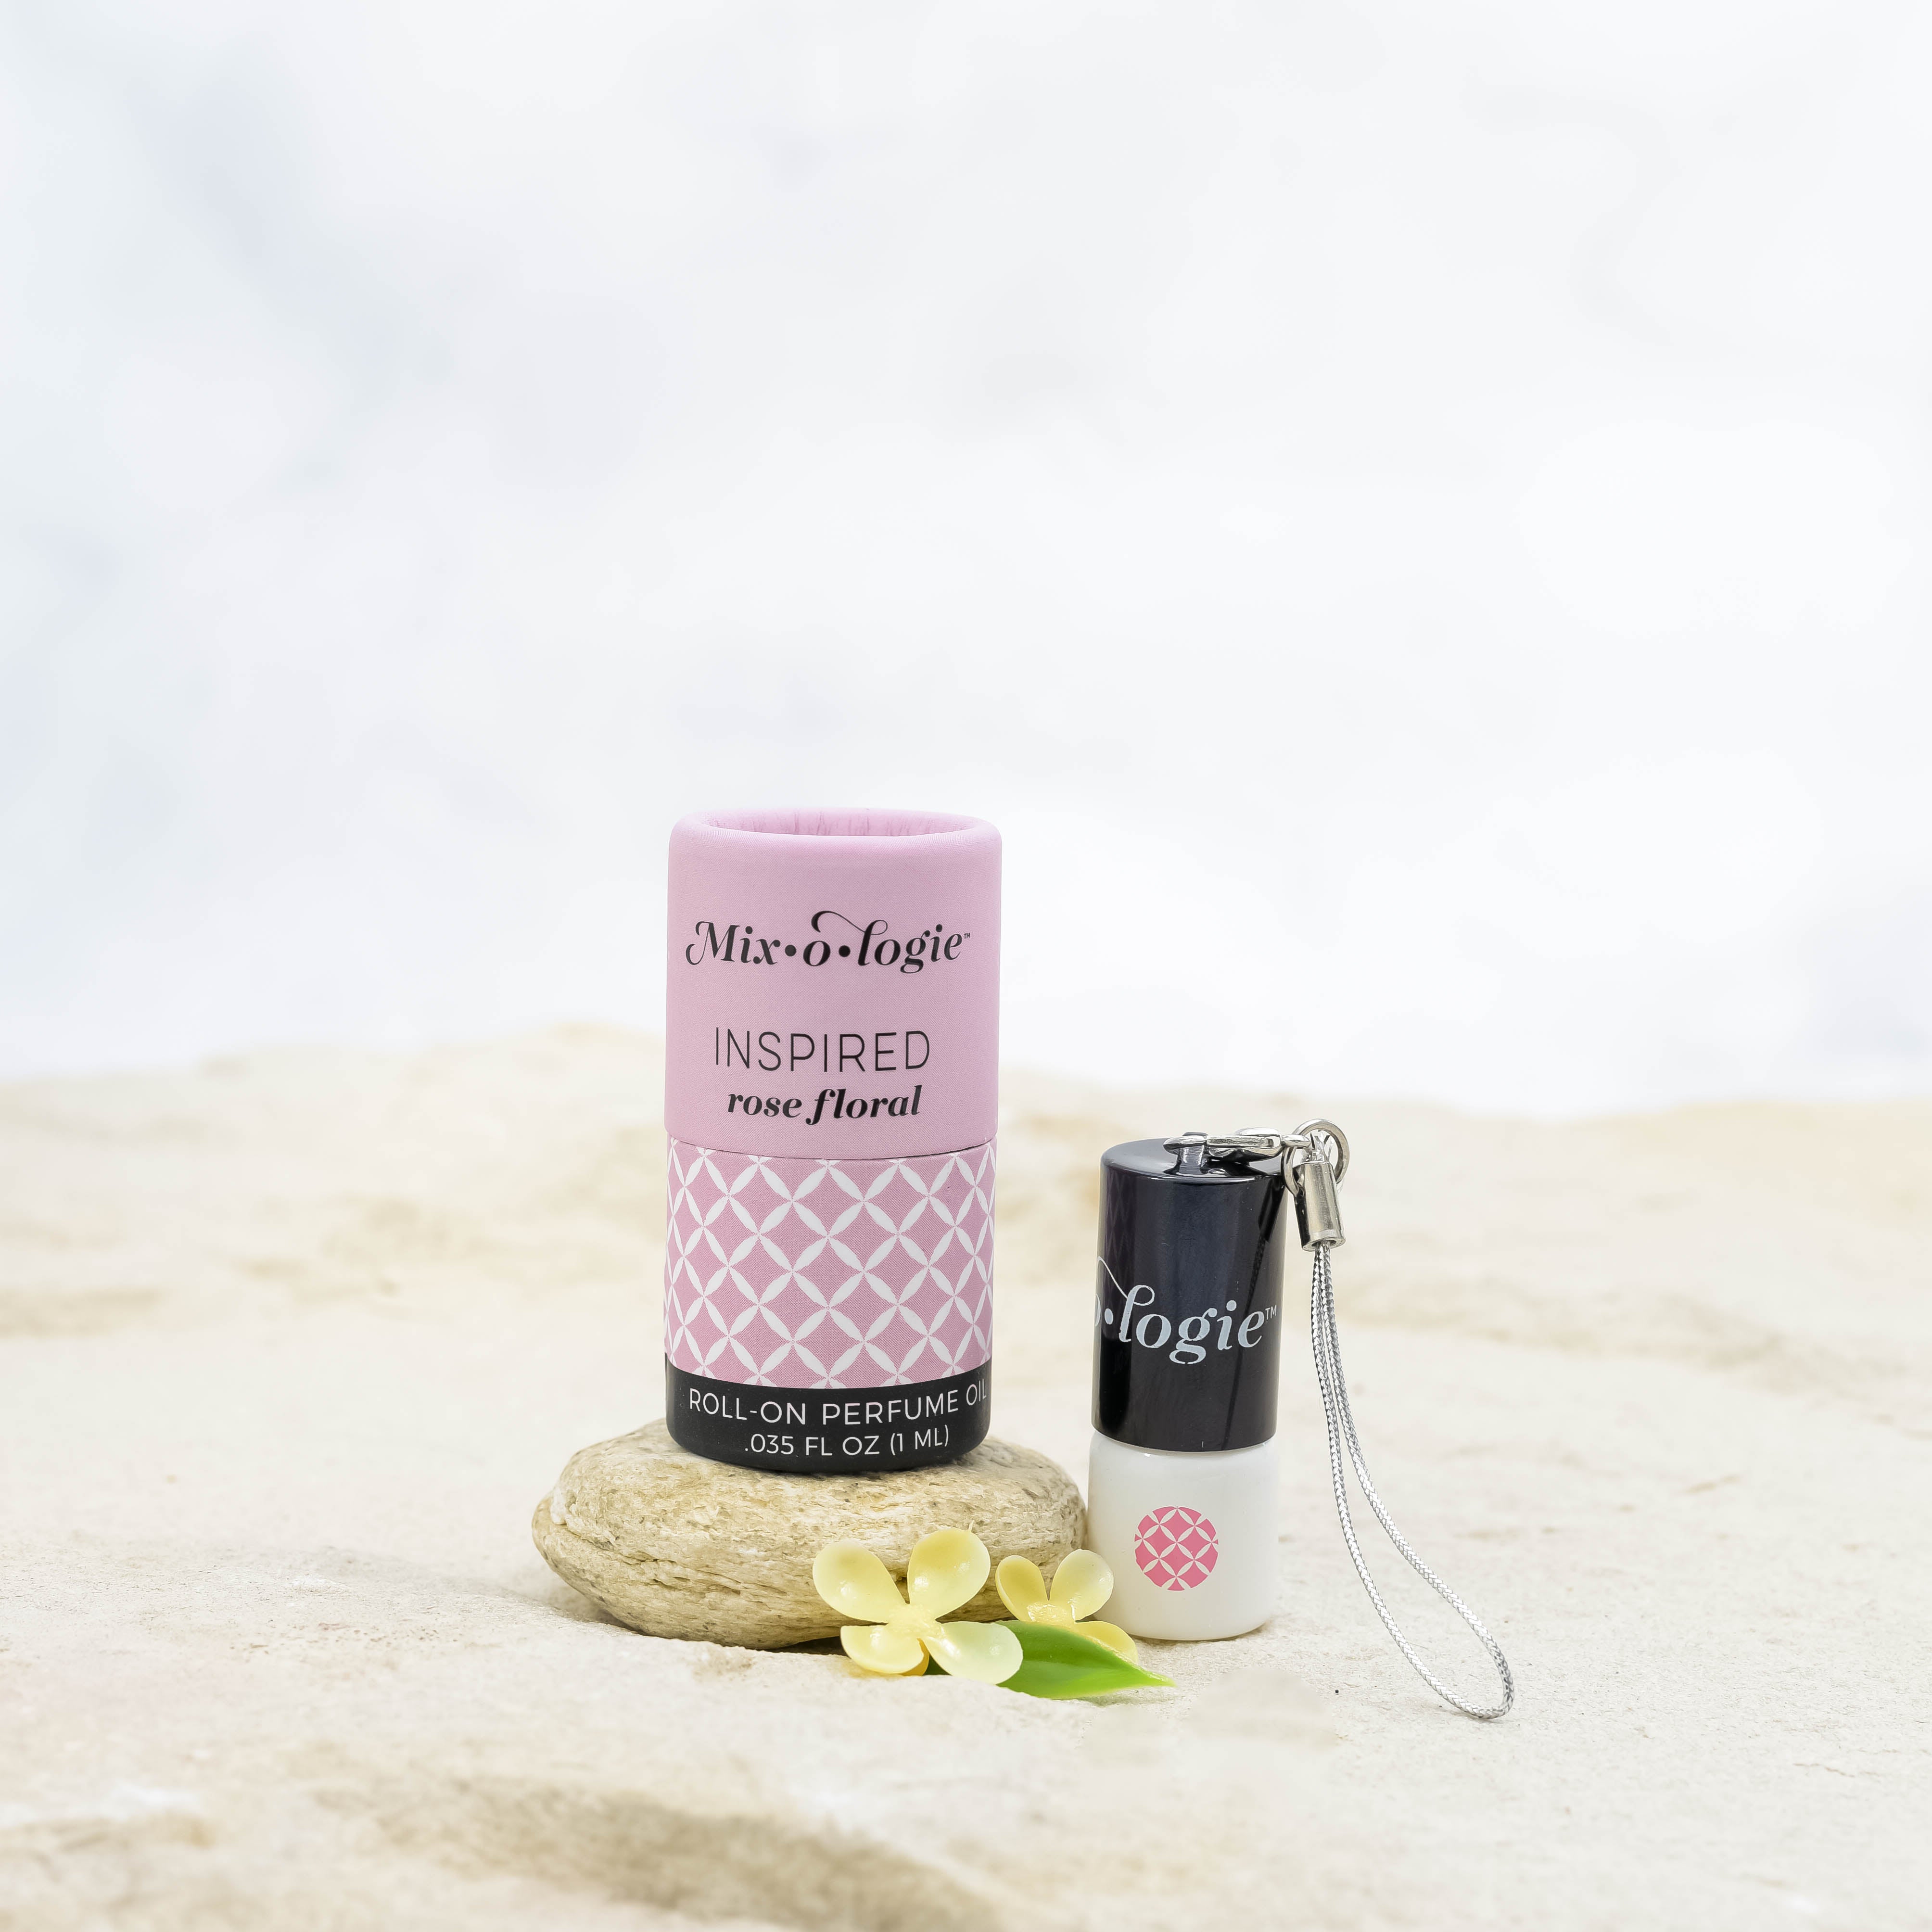 Inspired (Rose Floral) mini white cylinder rollerballs with black top and keychain attachment with pale pink diamond-like pattern and has .035 fl oz or 1 mL. Pale pink cylinder packing tube with pale pink wave-like pattern. Roll-on perfume oil. Mini rollerball and cylinder tube are in sand on a rock with yellow flowers.